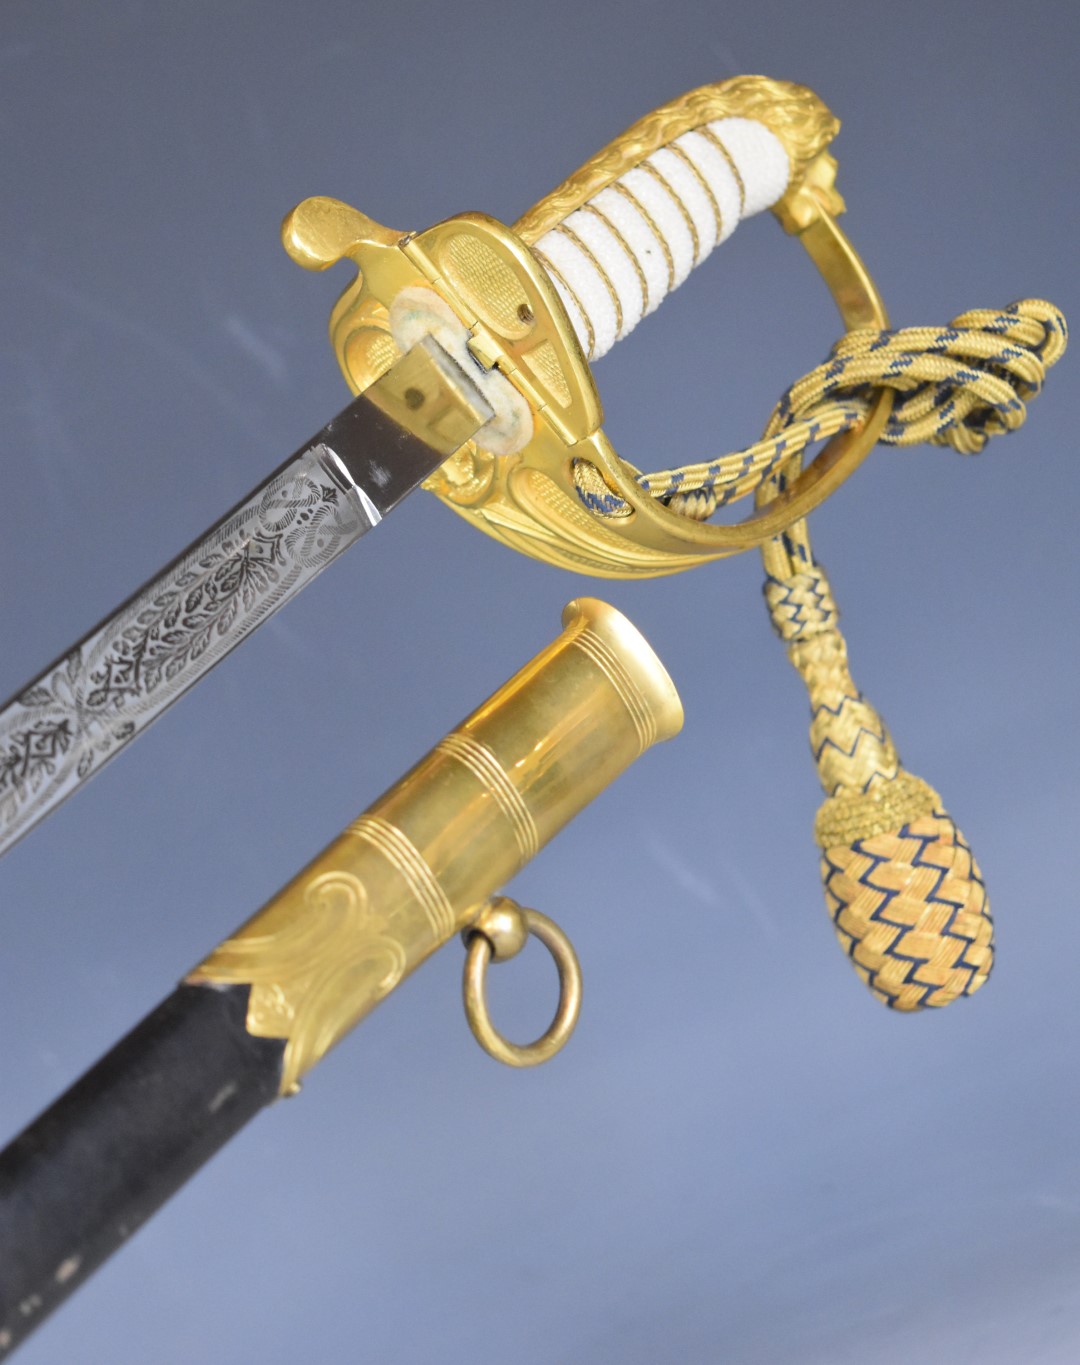 Royal Navy 1827 pattern officer's dress sword with lion head pommel, folding guard, fouled anchor